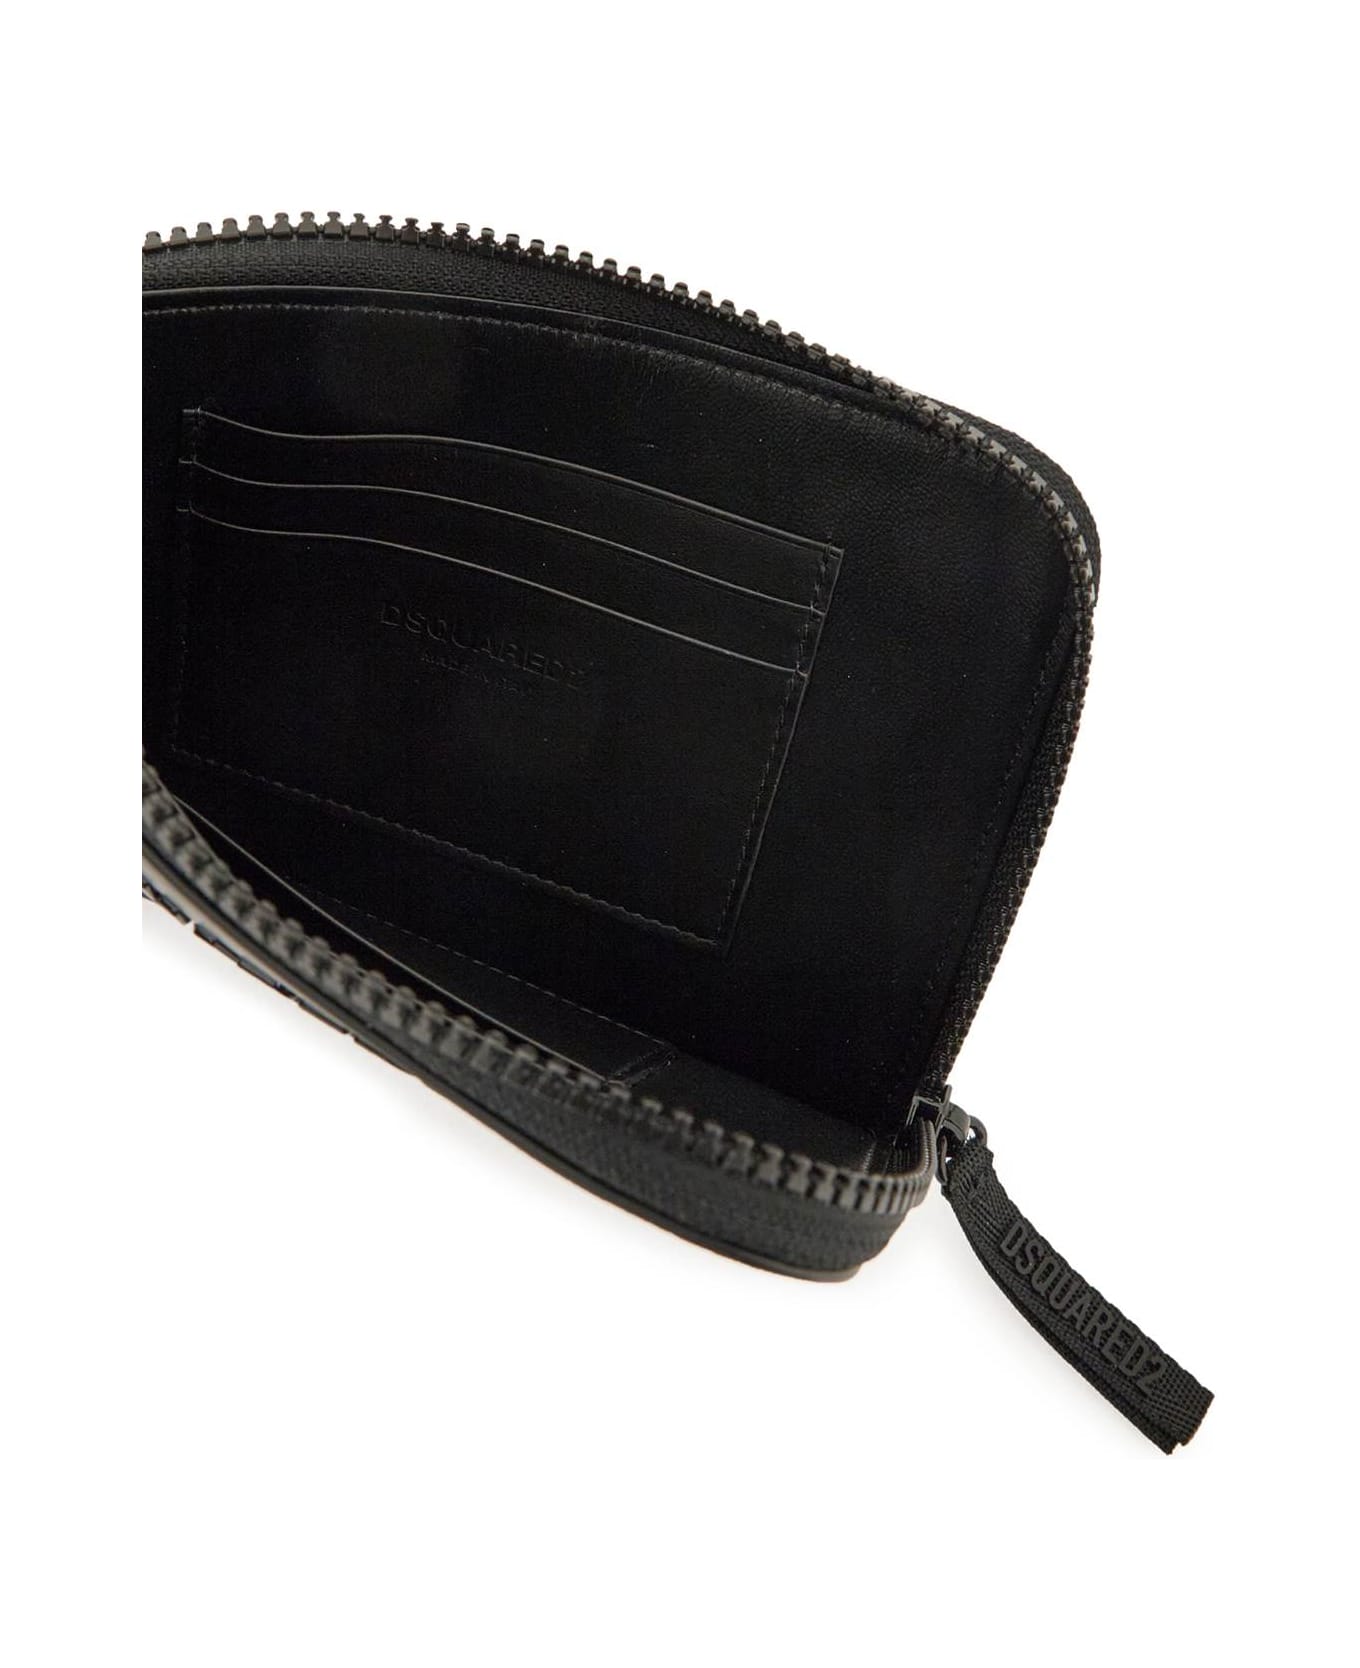 Dsquared2 Credit Card Pouch With Logo - NERO (Black) トラベルバッグ